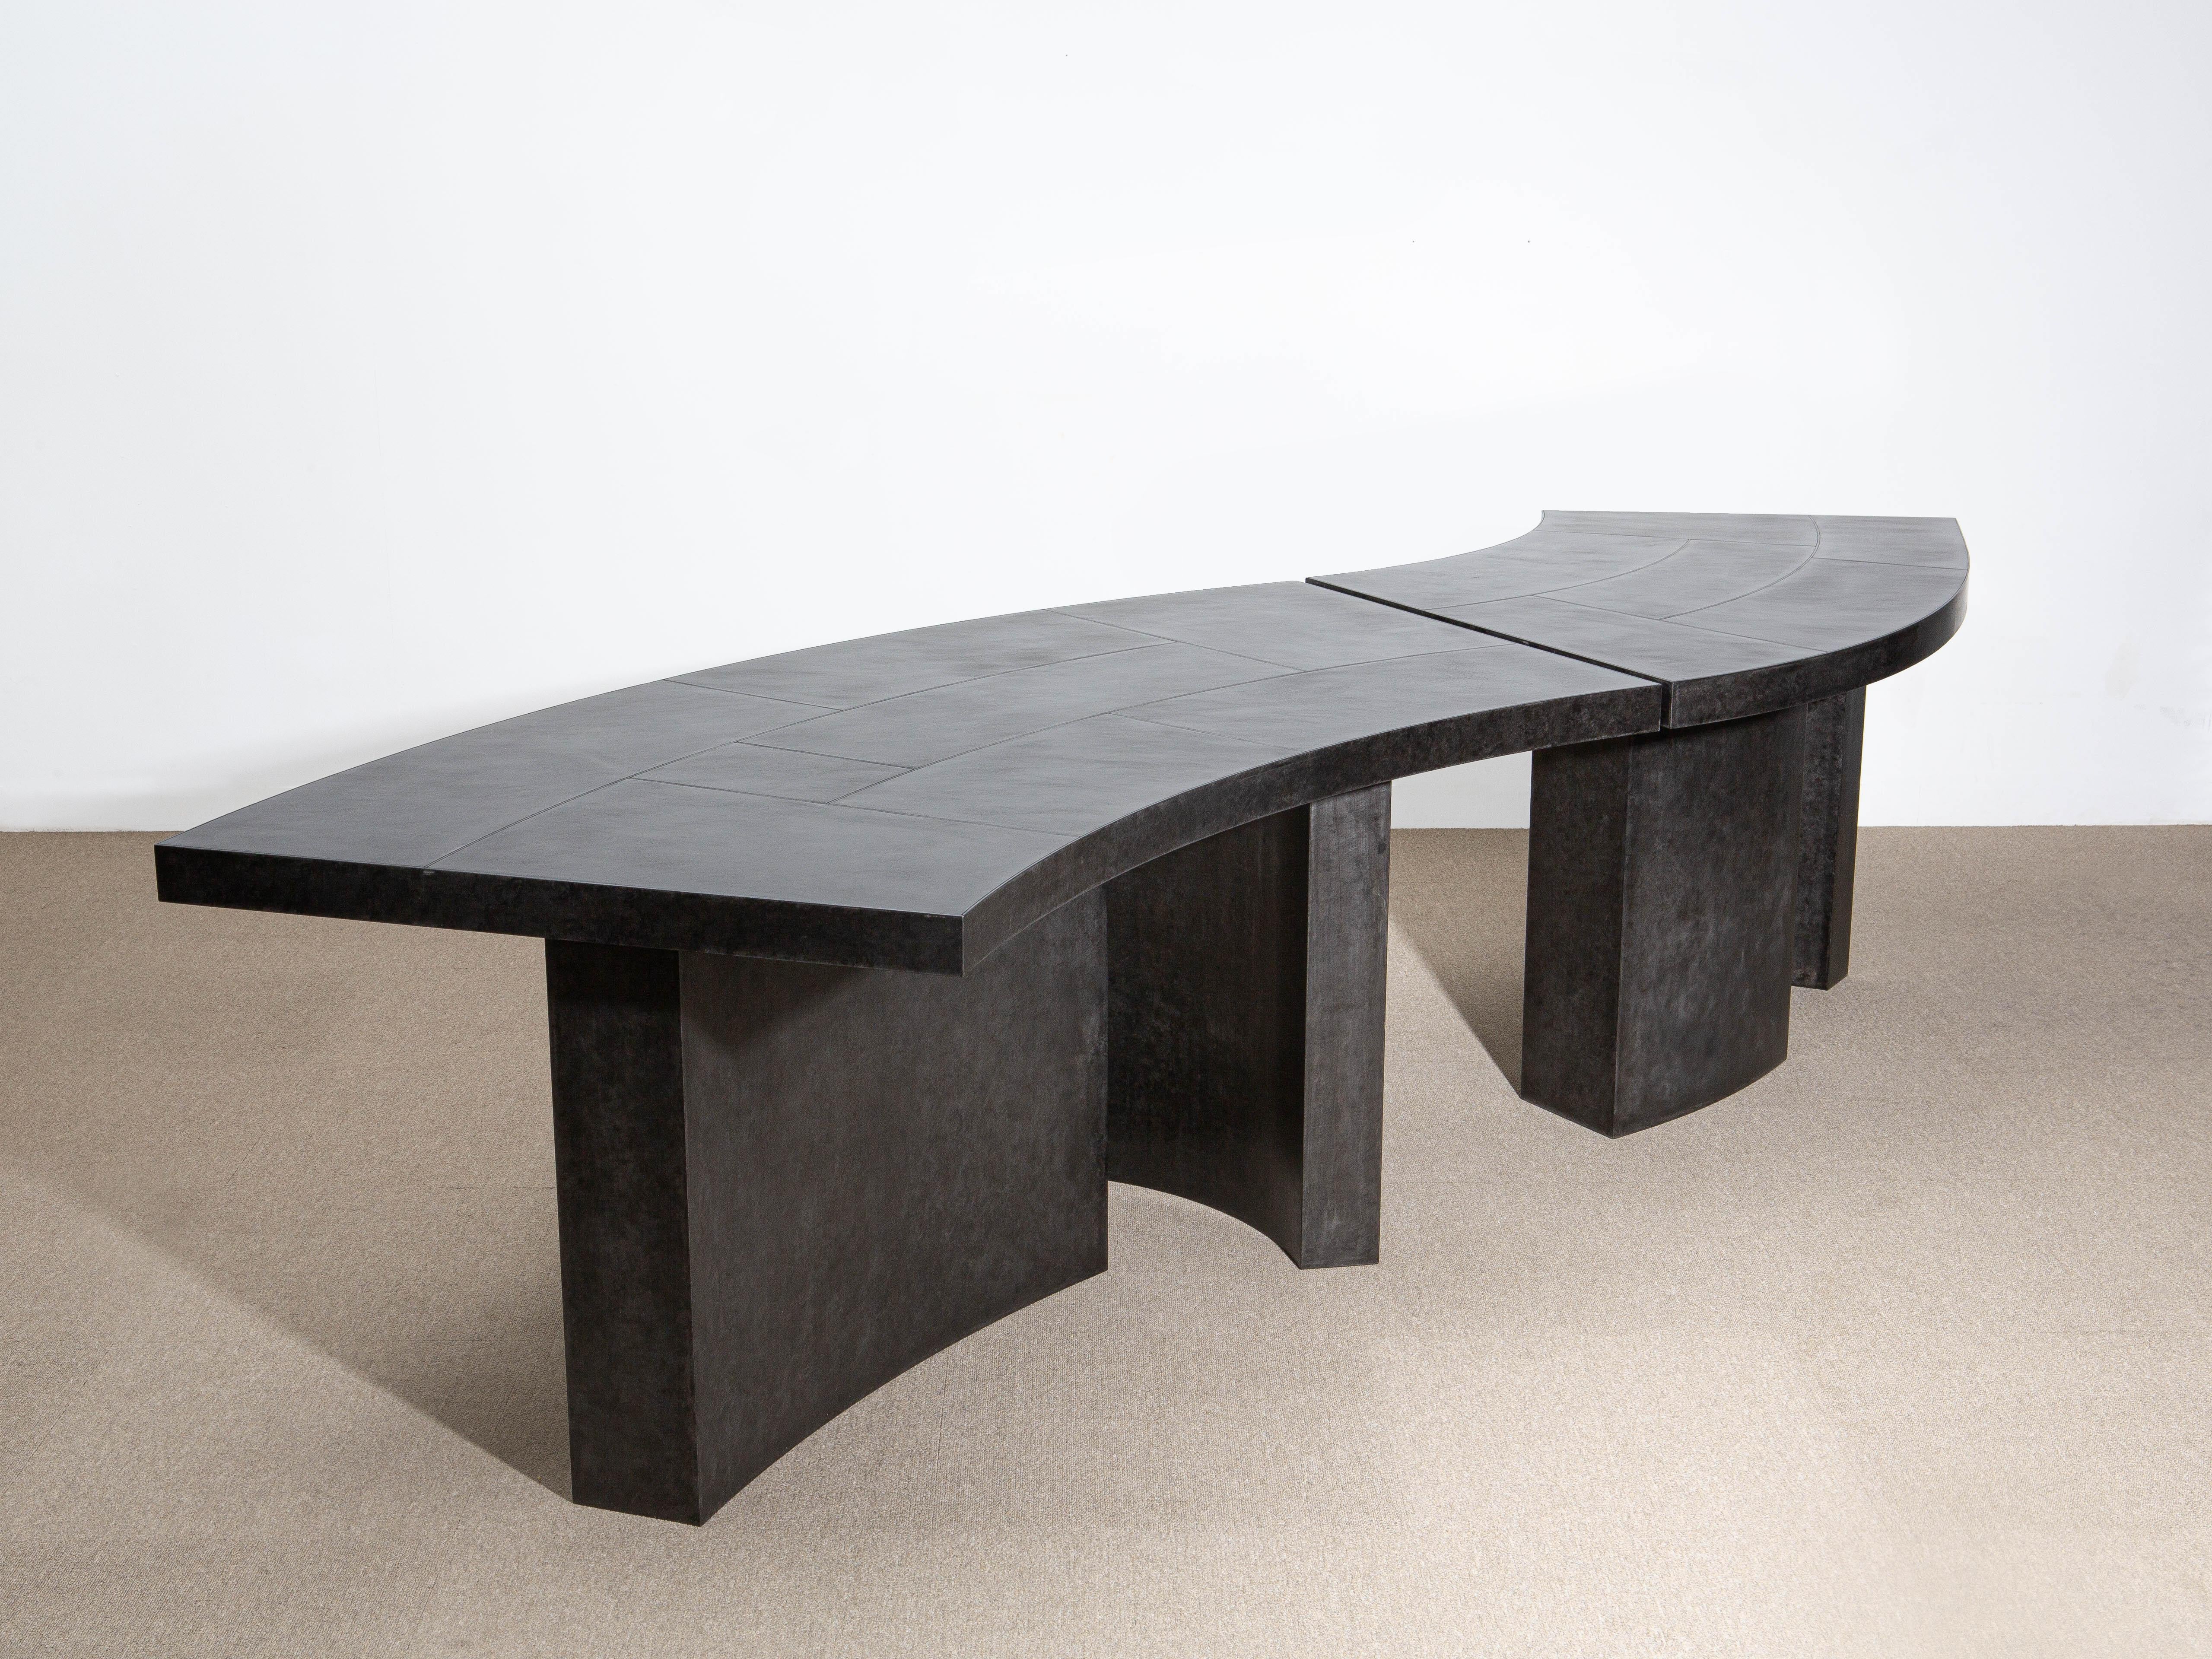 Large layered parkerized steel desk by Hyungshin Hwang
Dimensions: D 310 x W 100 x H 75 cm
Materials: parkerized steel

Layered Series is the main theme and concept of work of Hwang, who continues his experiment which is based on architectural